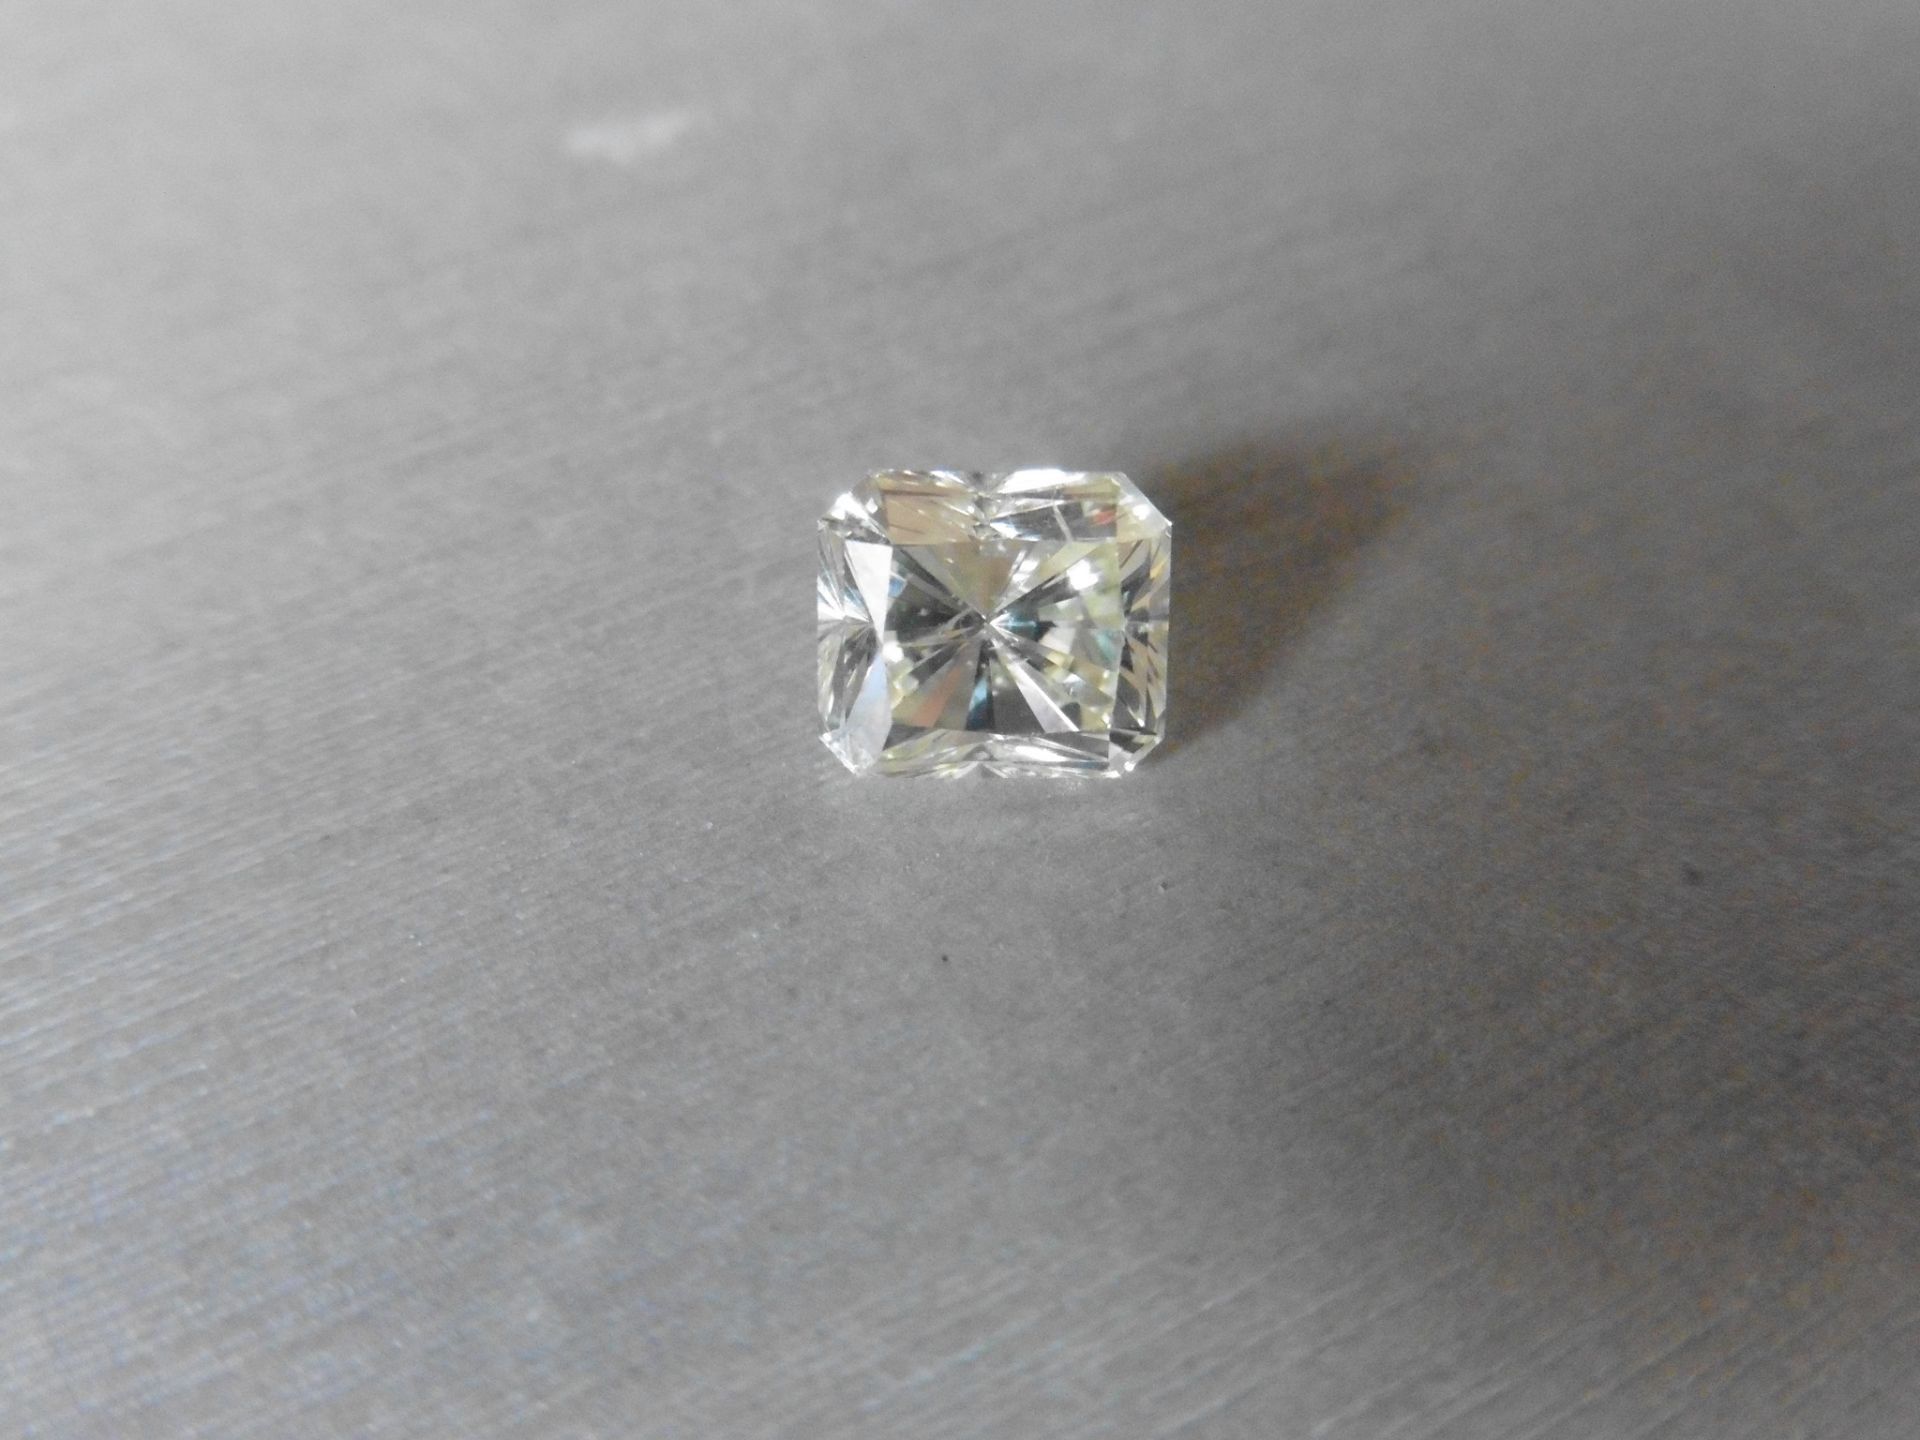 2.65ct single radiant cut diamond. Measures 7.82 x 6.94 x 5.95mm. K-L colour and Si clarity.